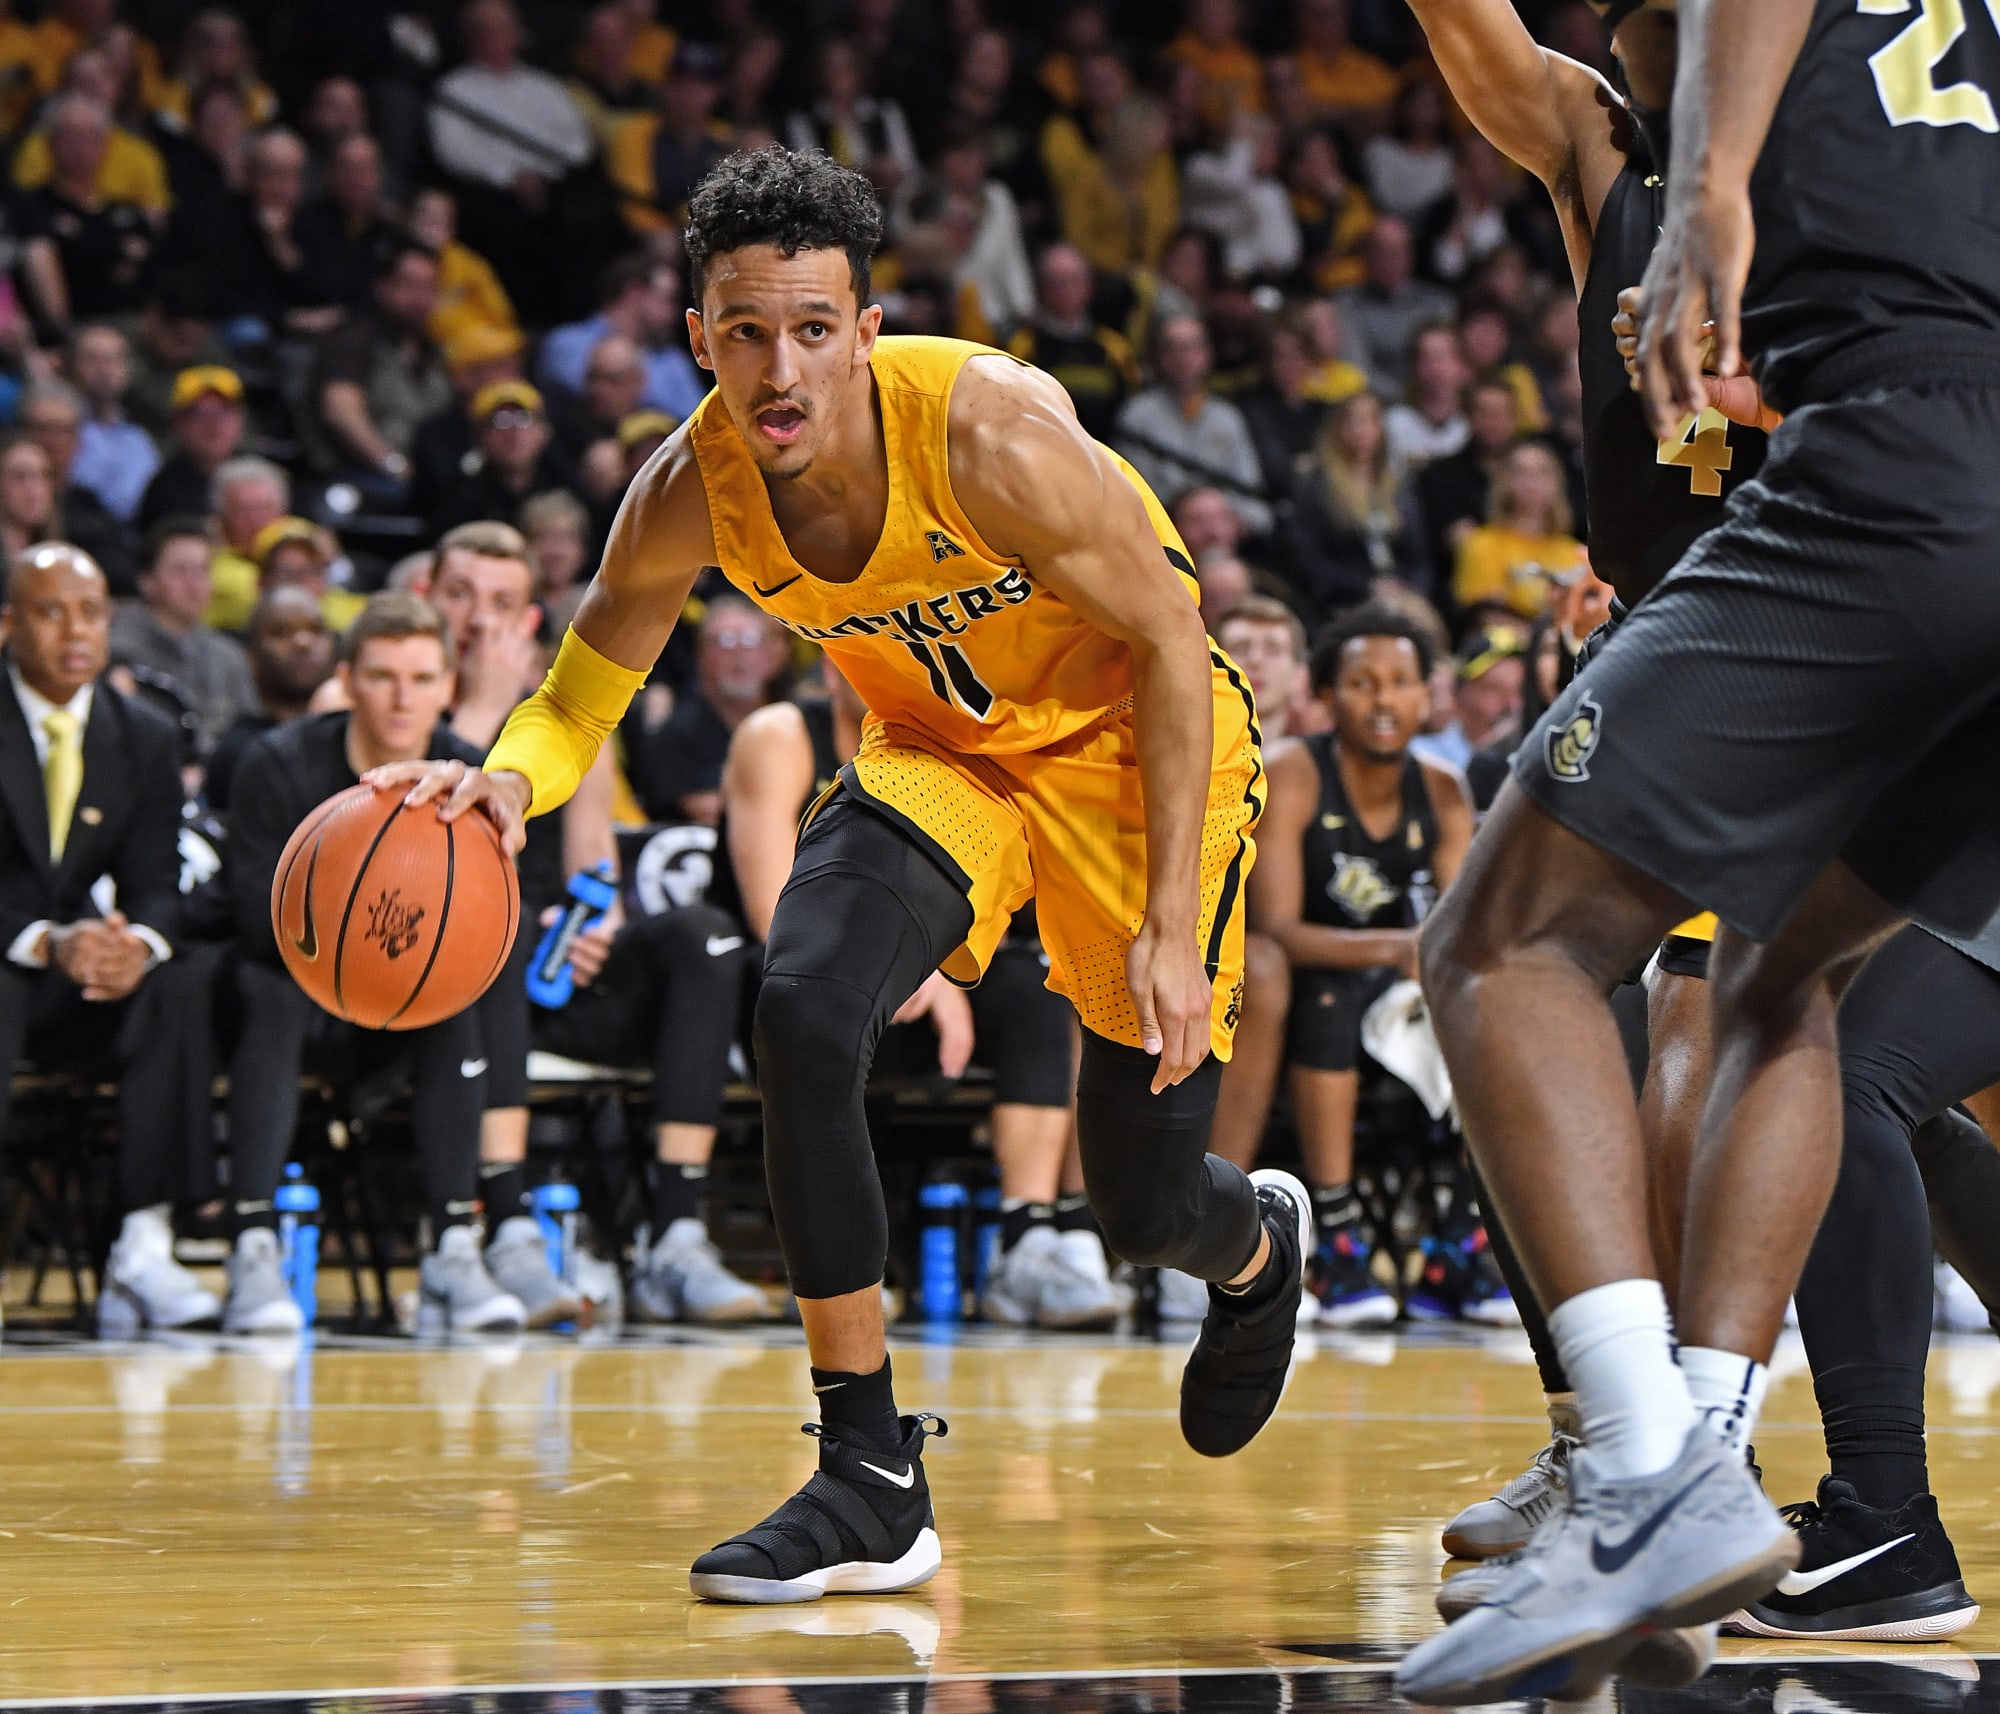 Wichita State Basketball Where do the Shockers go from here?